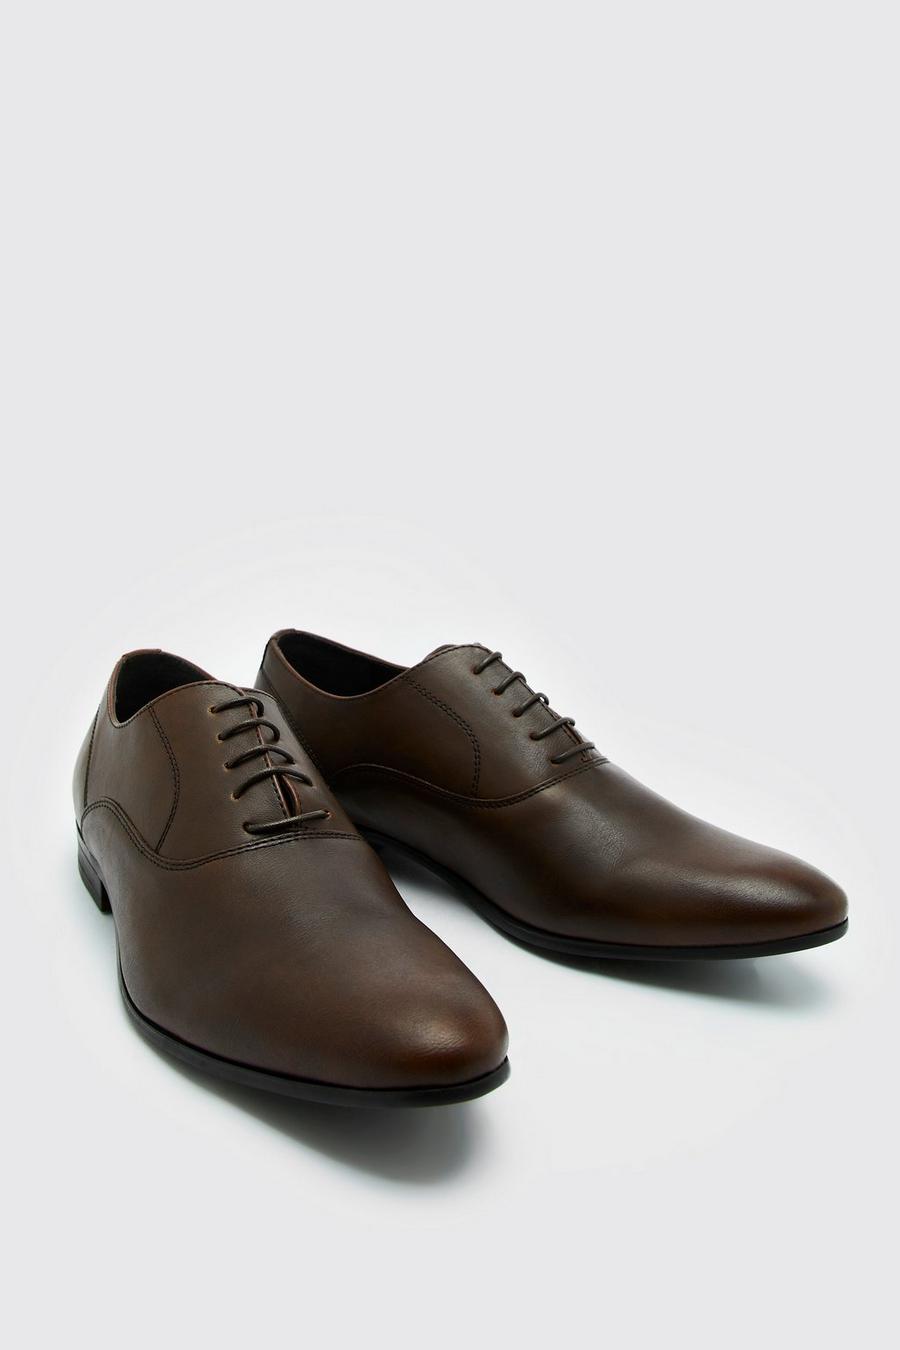 Chocolate marrone Faux Leather Oxford